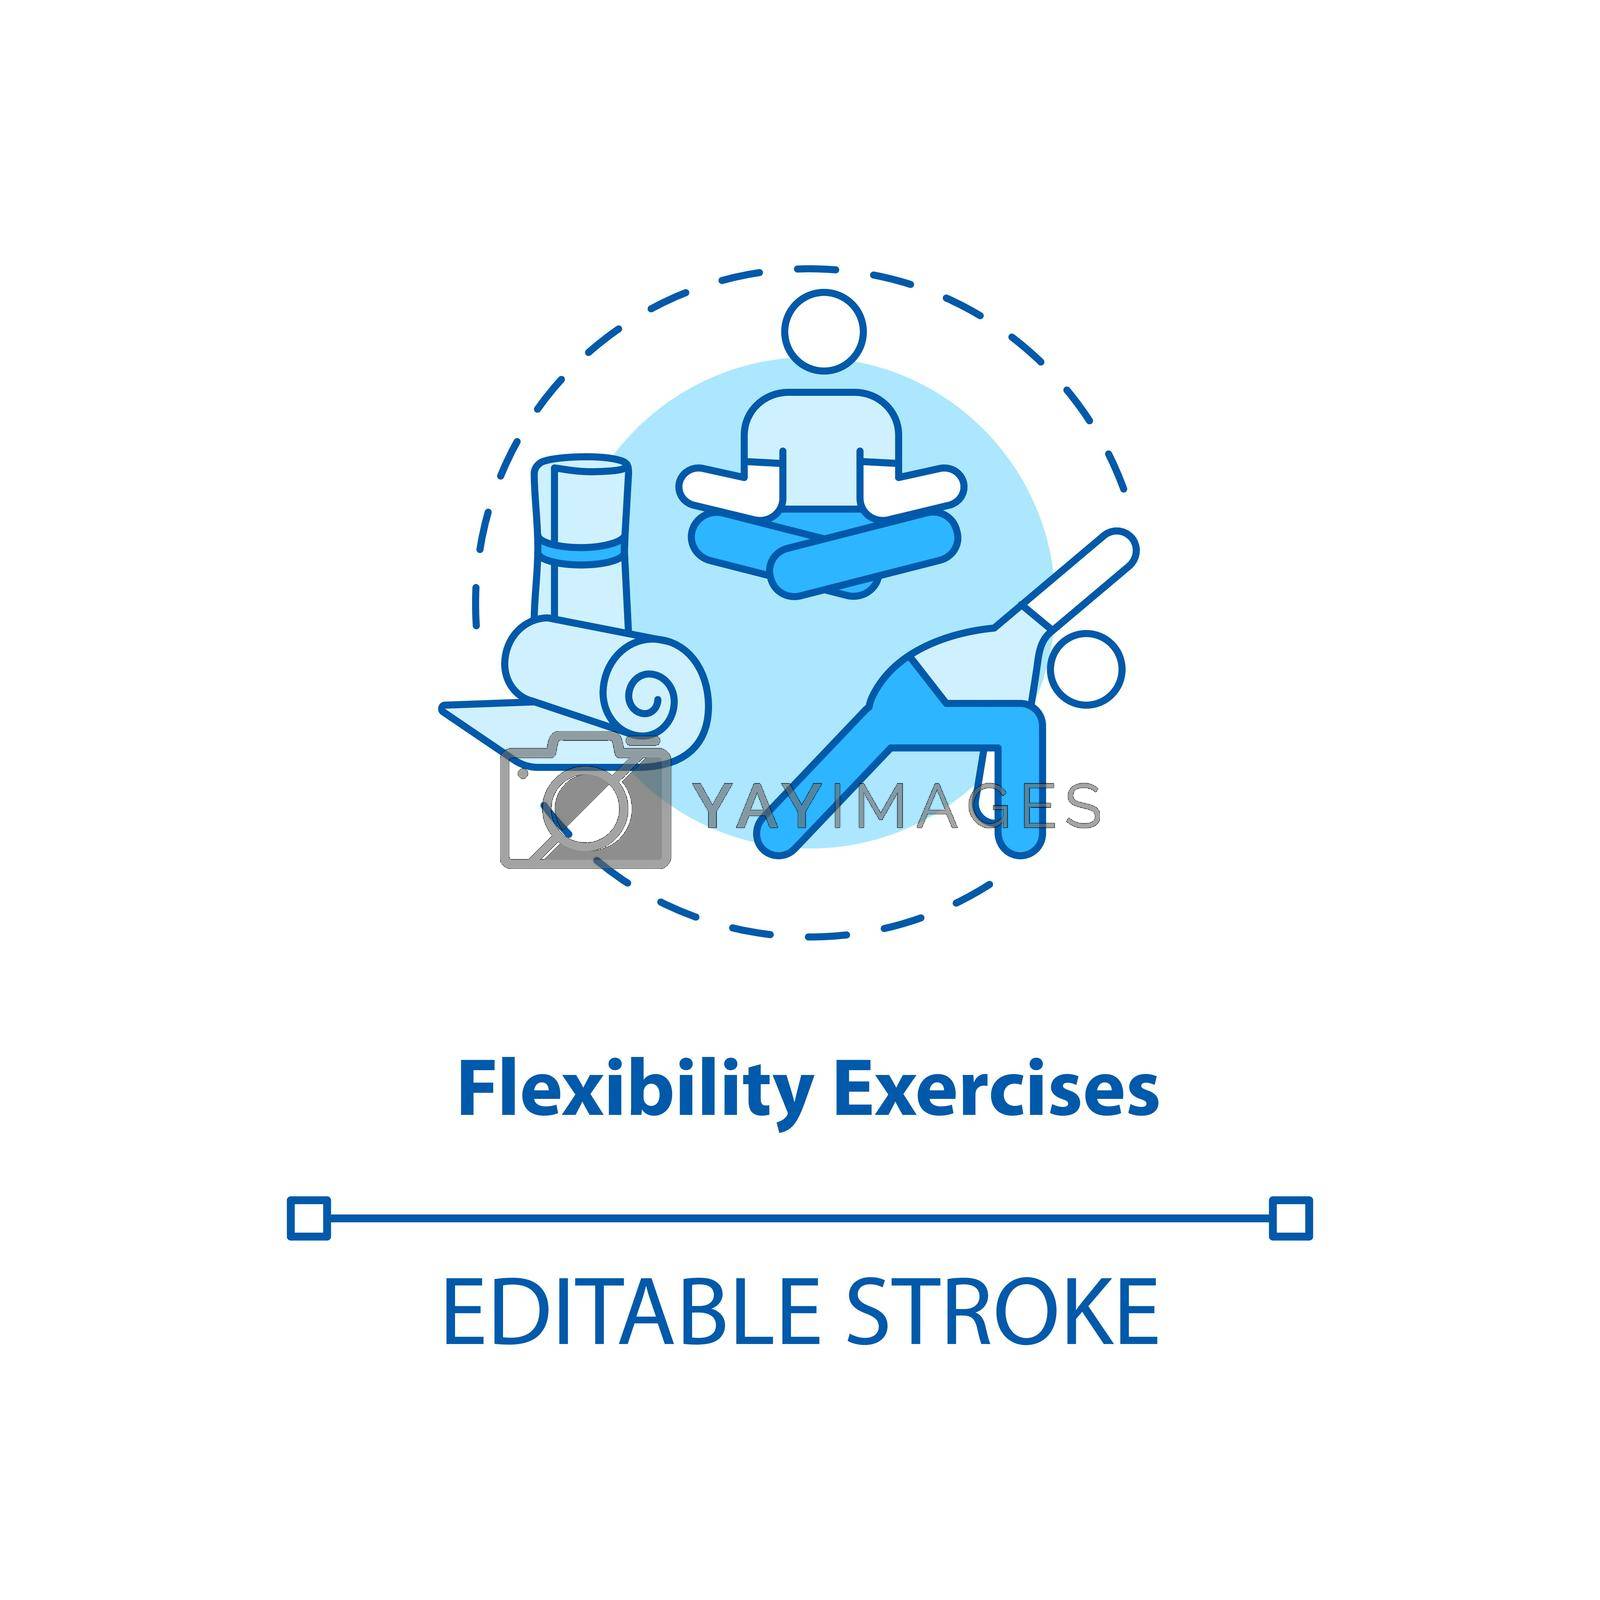 Royalty free image of Flexibility exercises turquoise concept icon by bsd